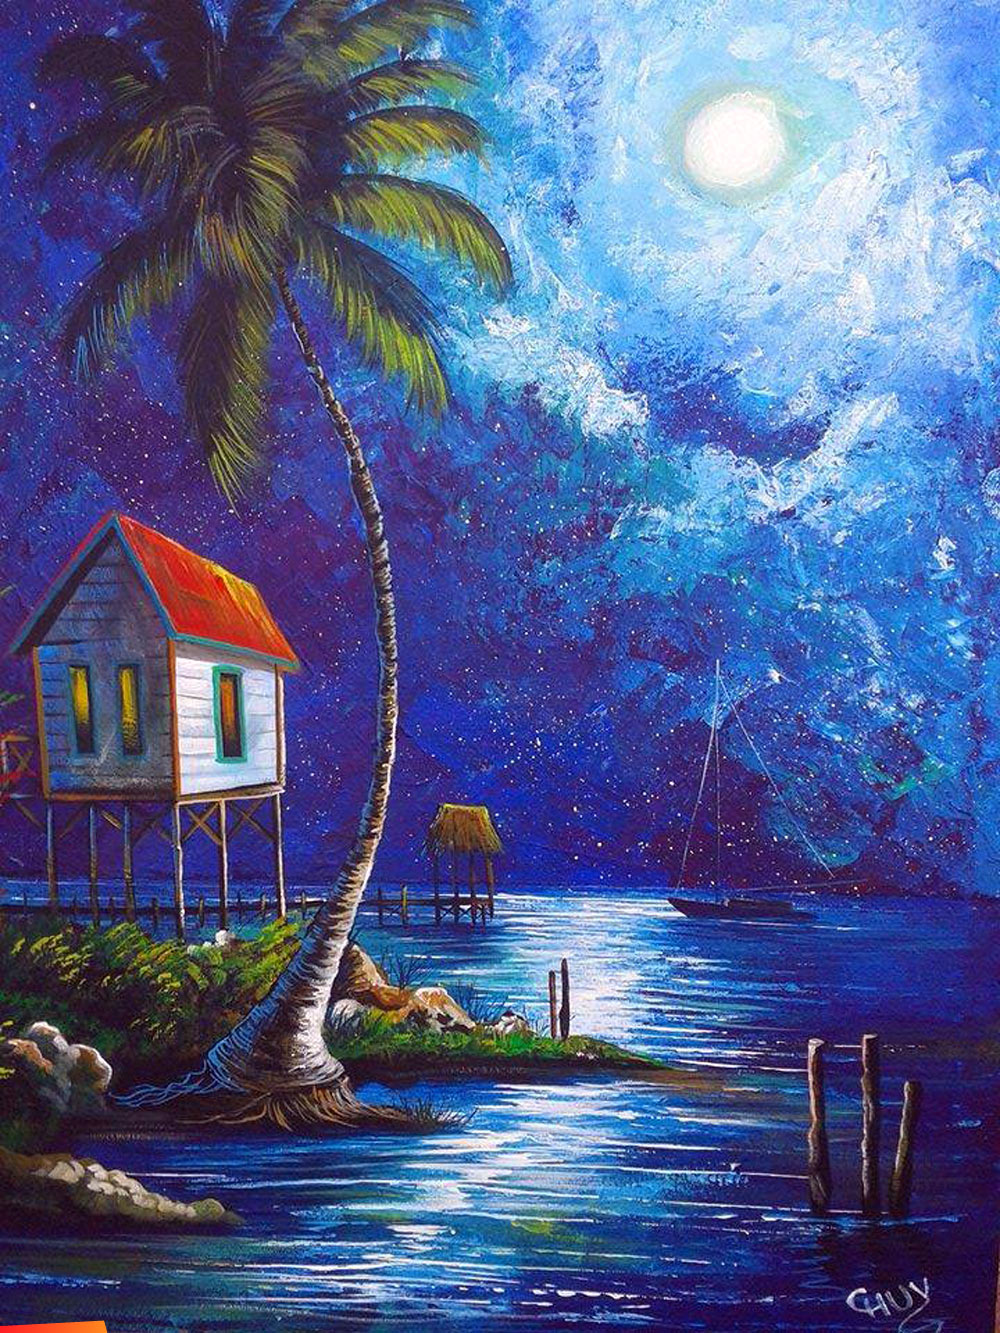 Beautiful painting of a full moon on the beach, sailboat, homes on stilts and pier.... by Chuy Carillo